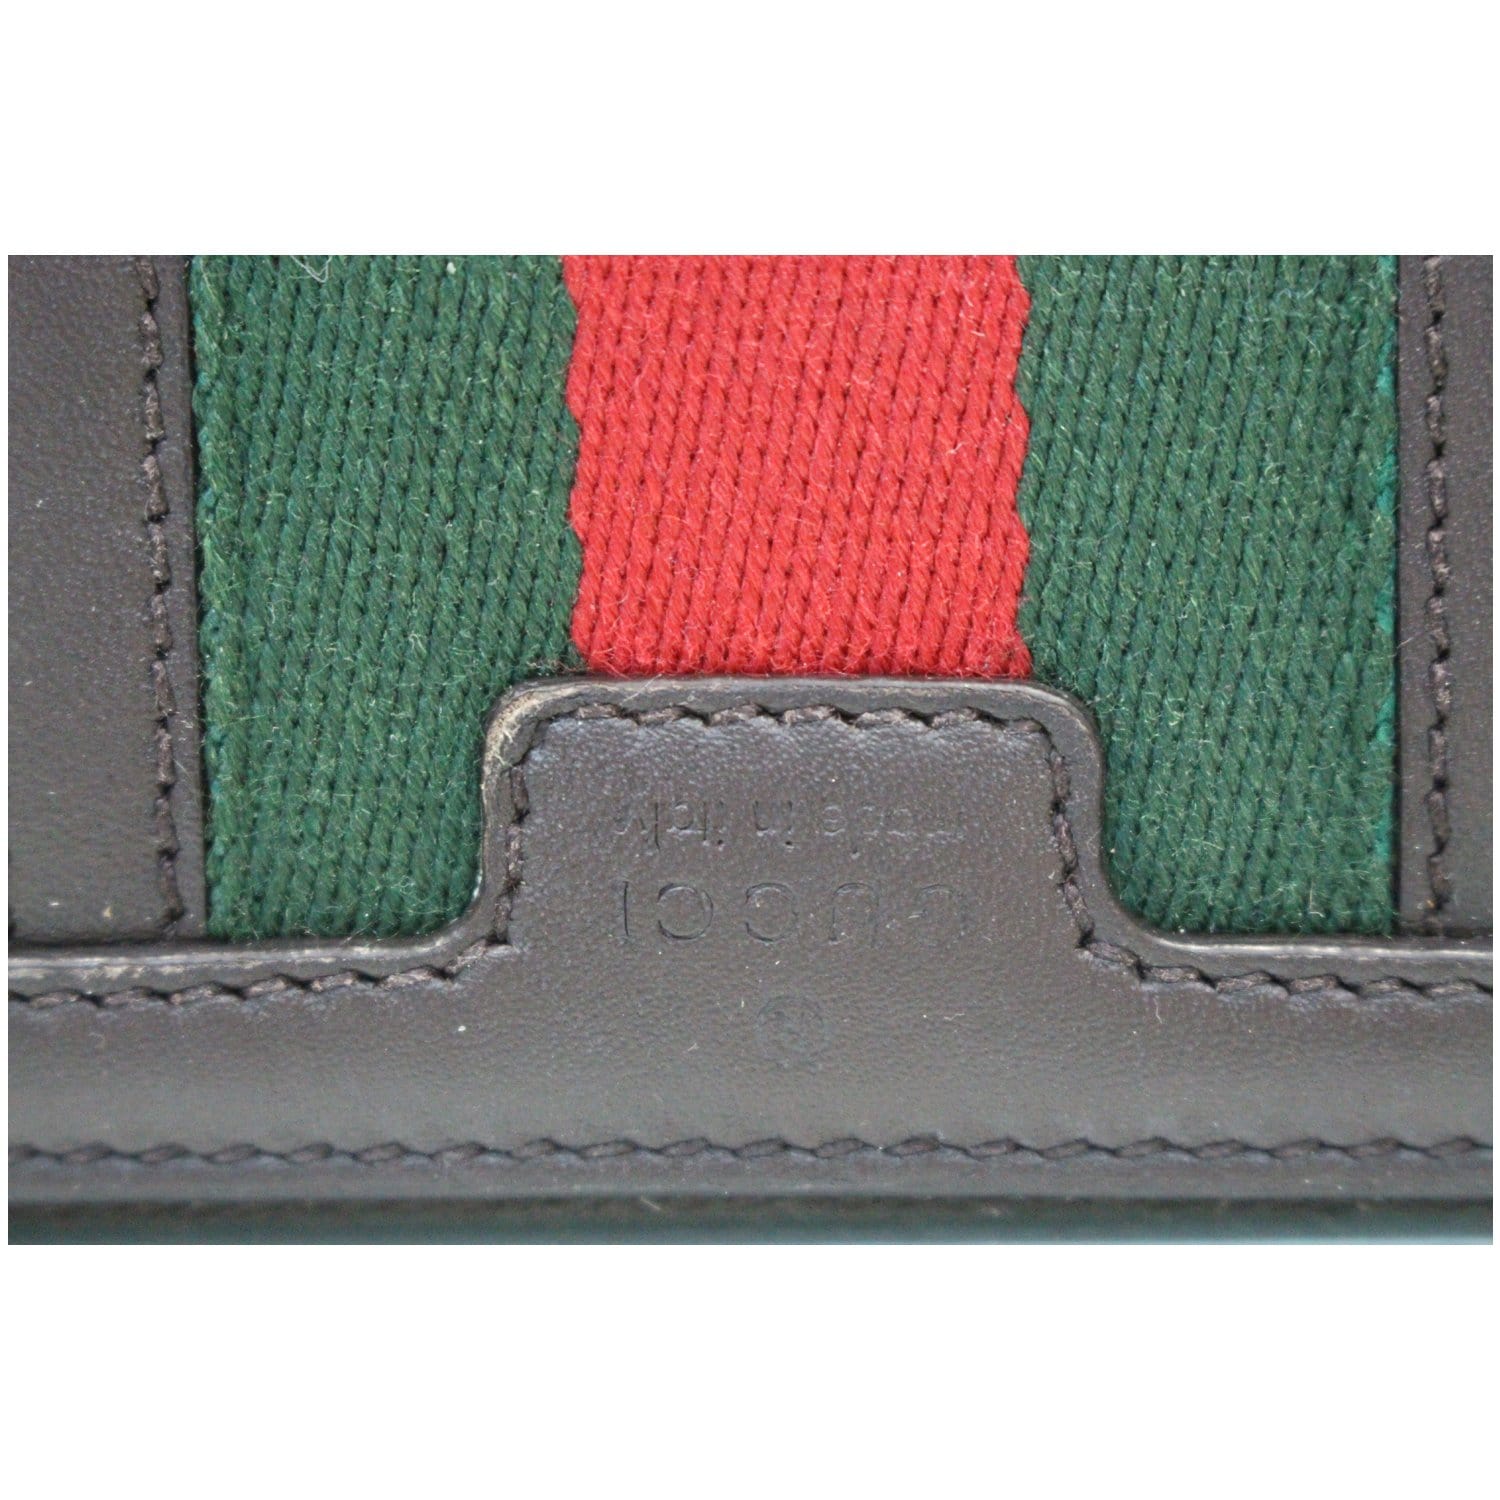 Mens Vintage Gucci Wallet for Sale in Santa Ana, CA - OfferUp